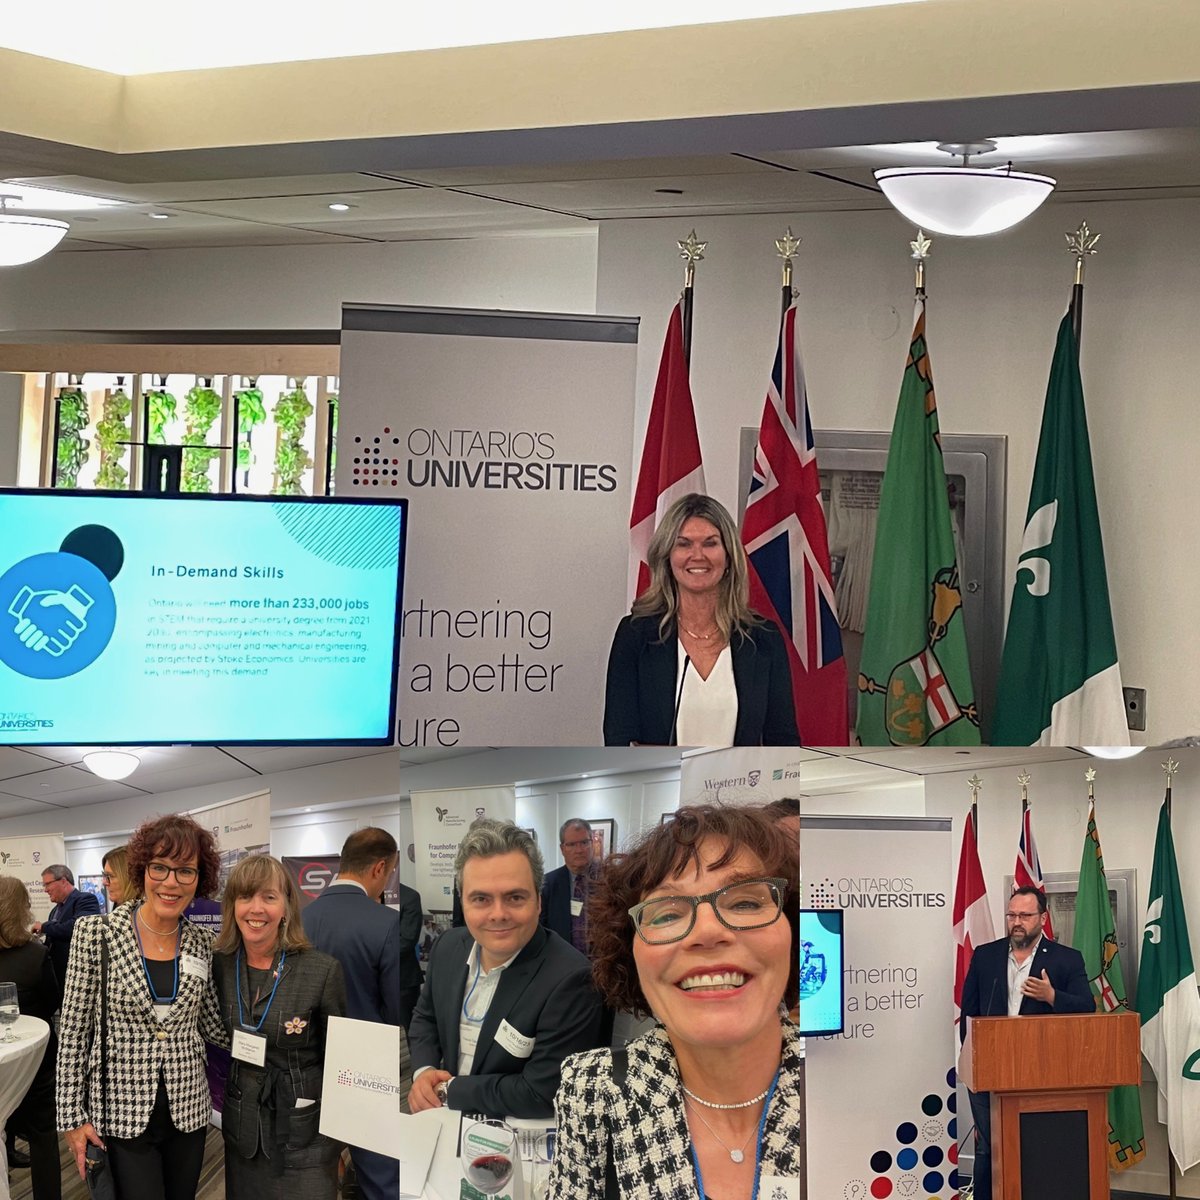 Congratulations to @JillDunlop1 and @OntUniv to a super reception #QueensPark @ONgov tonight showcasing Ontario's foremost #research and #innovation happening at our world-leading universities @ONtrainandstudy @ontariogenomics @investontario @FlavioVolpe1